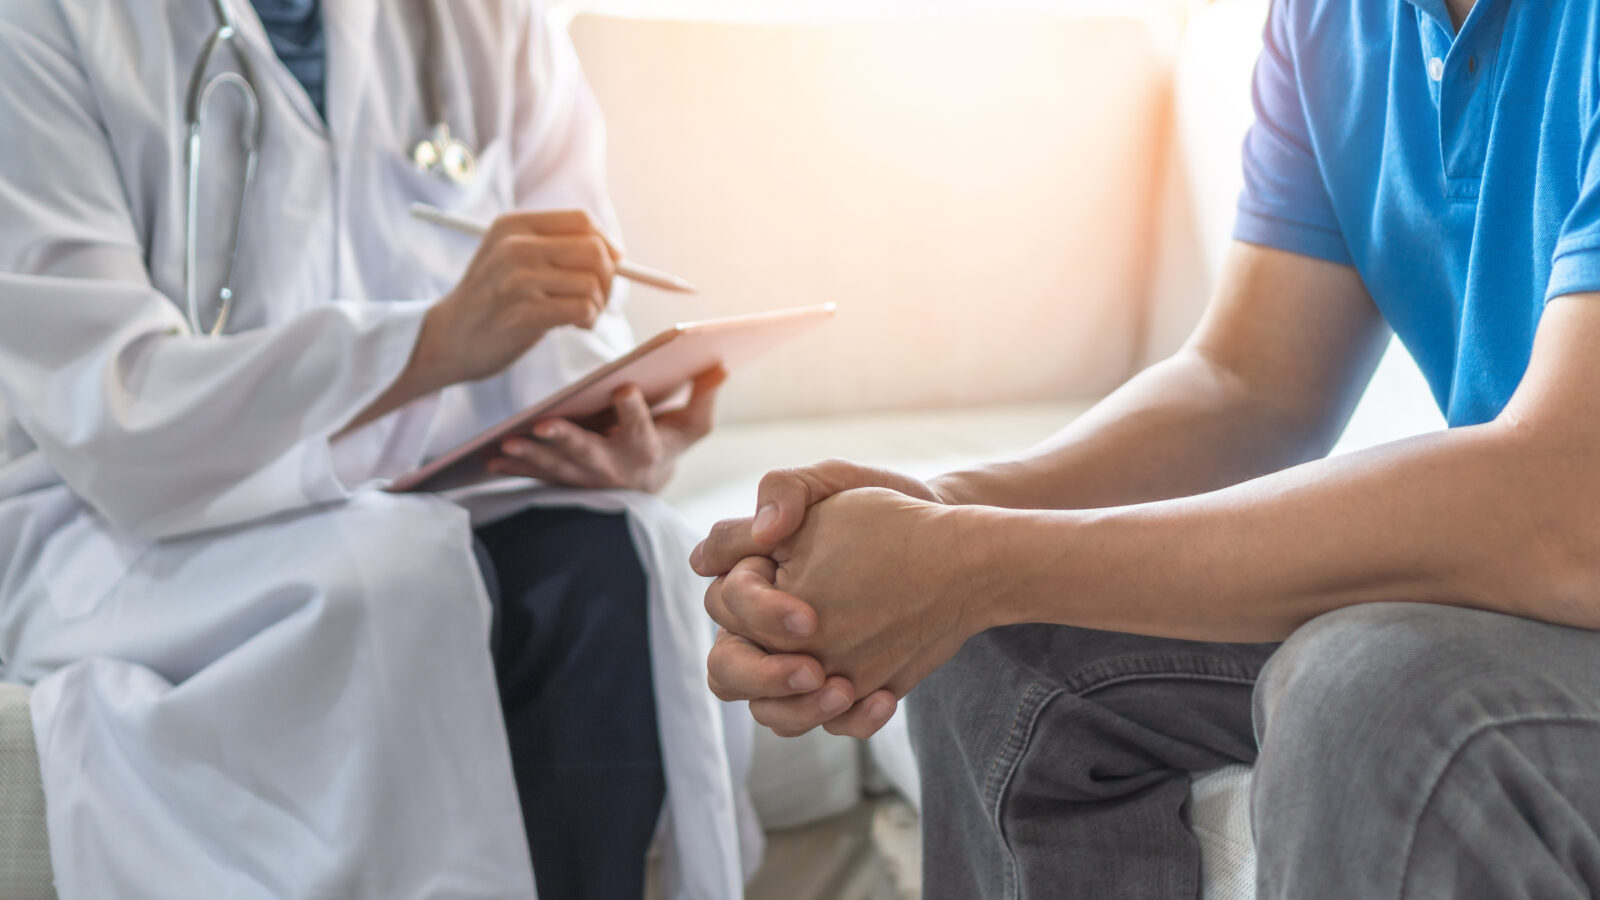 Men's health exam with doctor or psychiatrist working with patient having consultation on diagnostic examination on male disease or mental illness in medical clinic or hospital mental health service 2024/03/AdobeStock_284541276.jpeg 